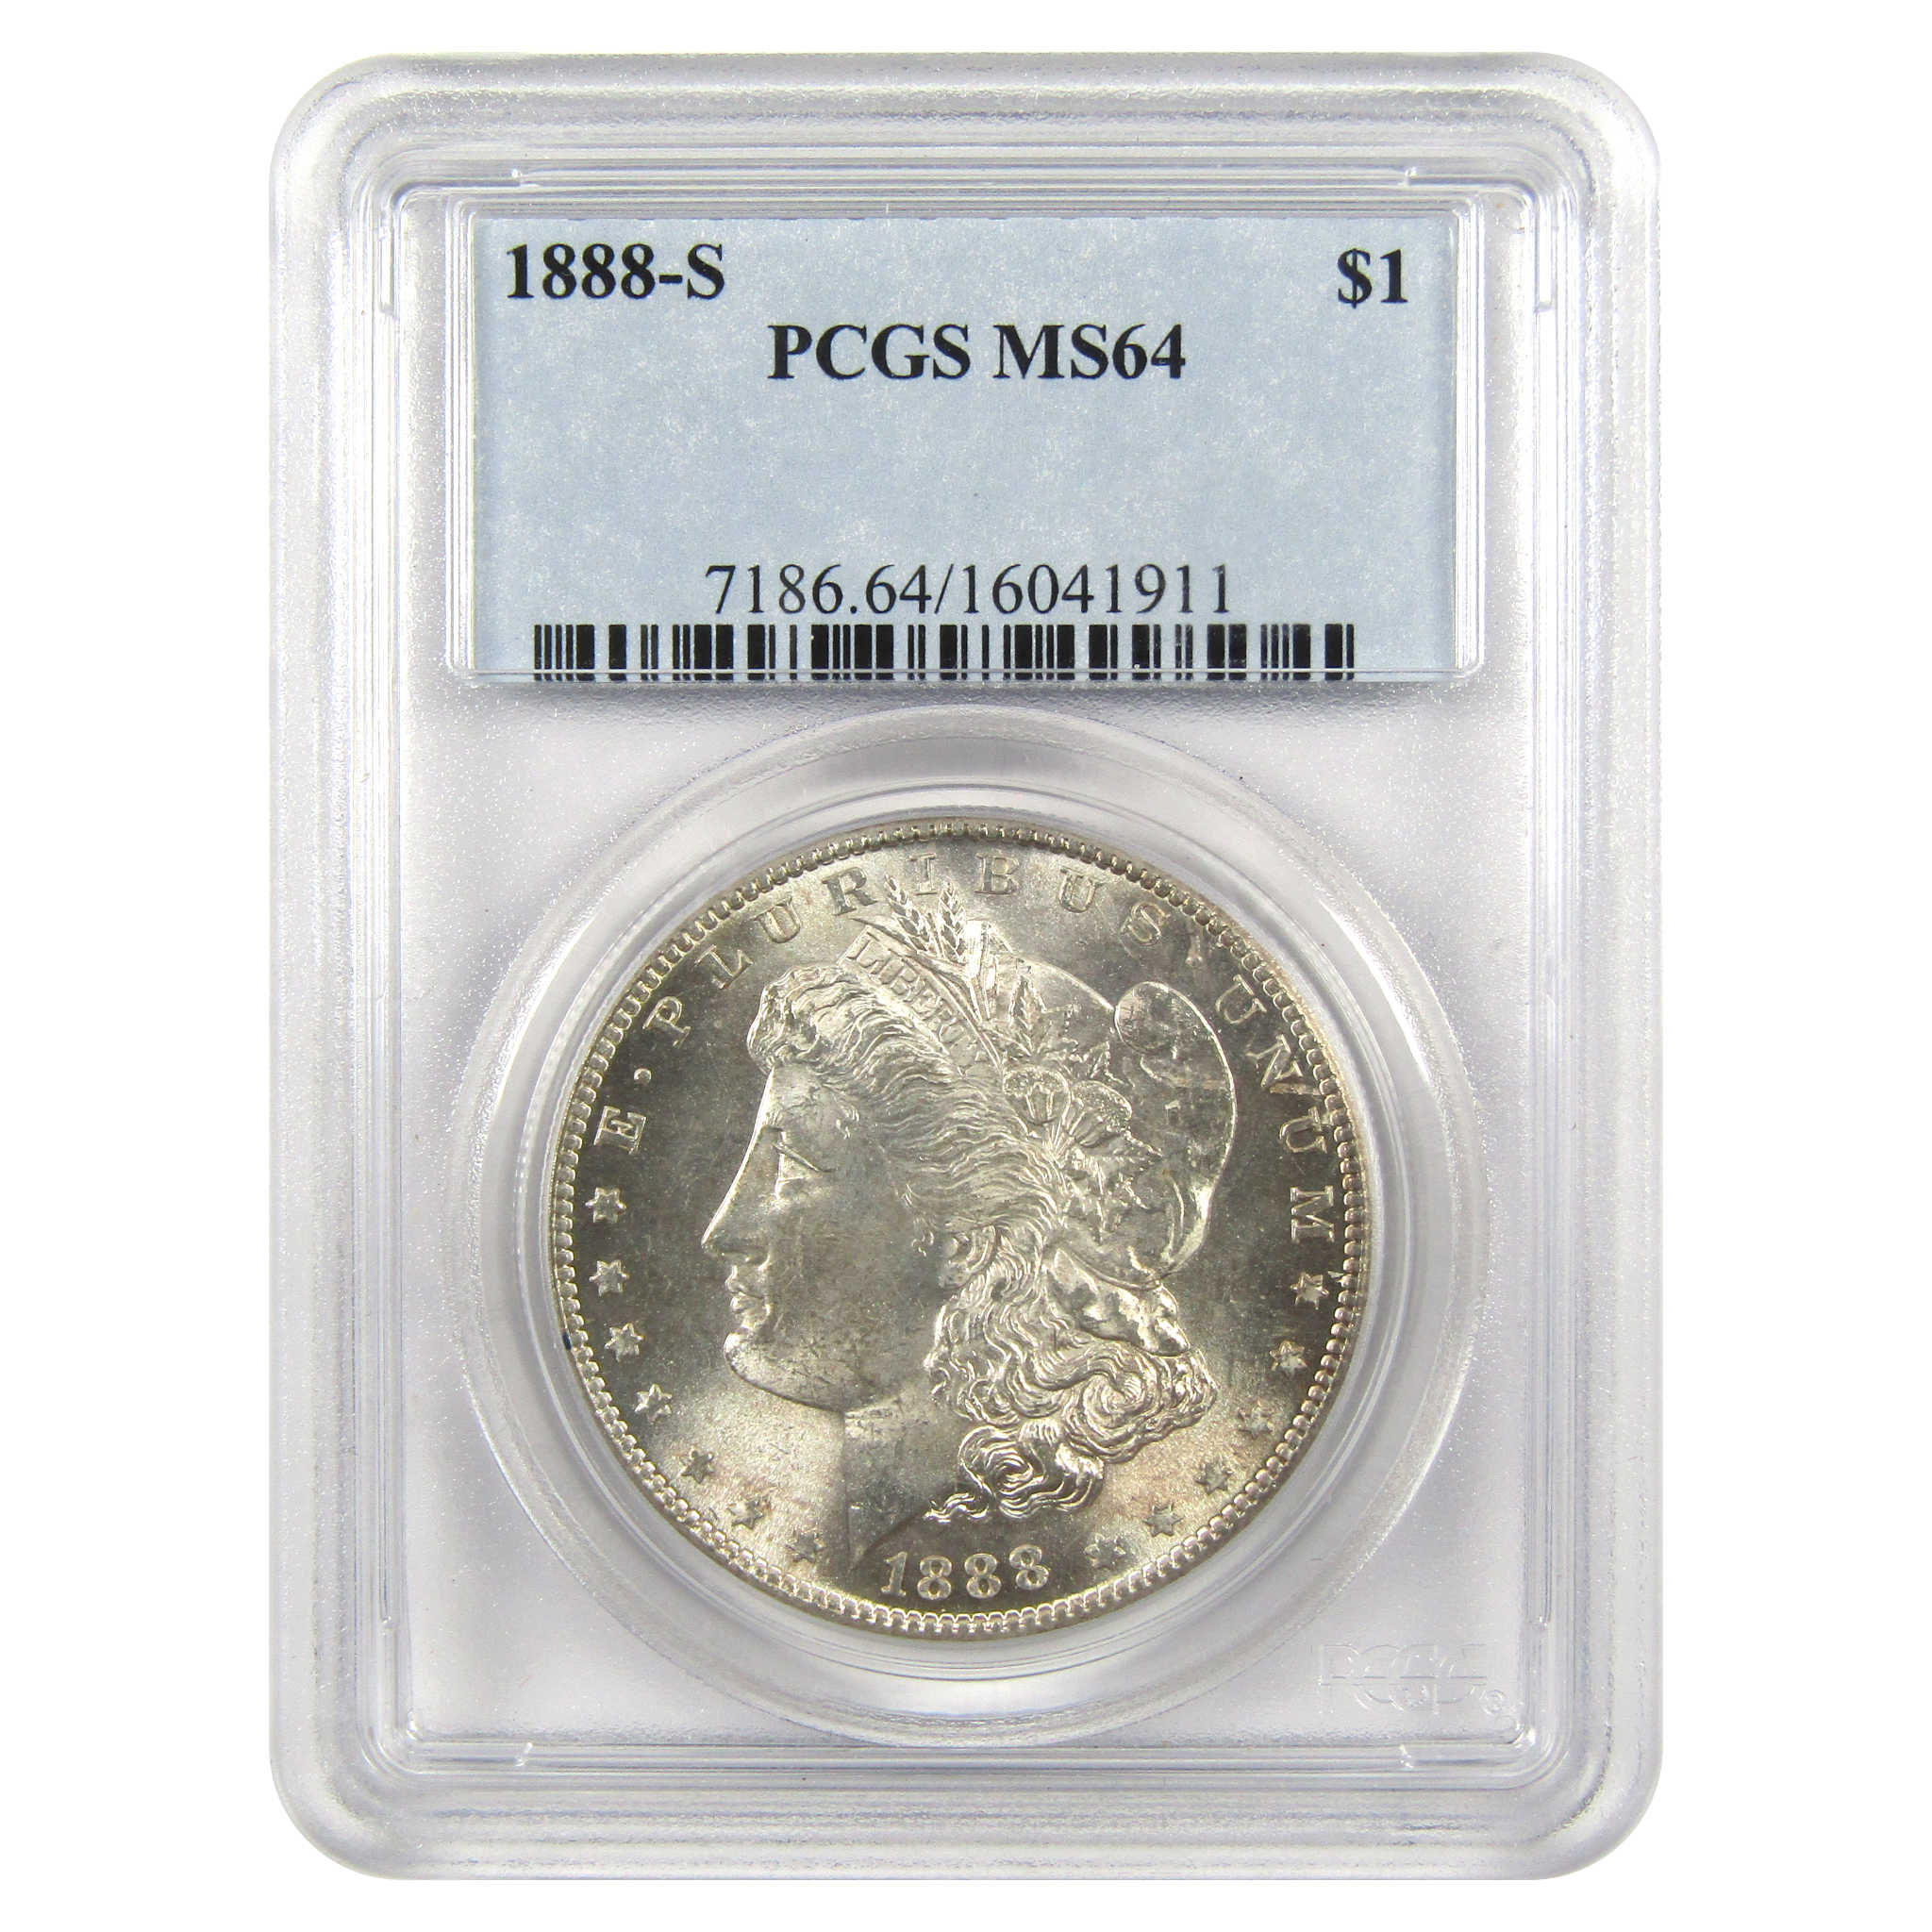 1888 S Morgan Dollar MS 64 PCGS Silver $1 Uncirculated Coin SKU:I11774 - Morgan coin - Morgan silver dollar - Morgan silver dollar for sale - Profile Coins &amp; Collectibles